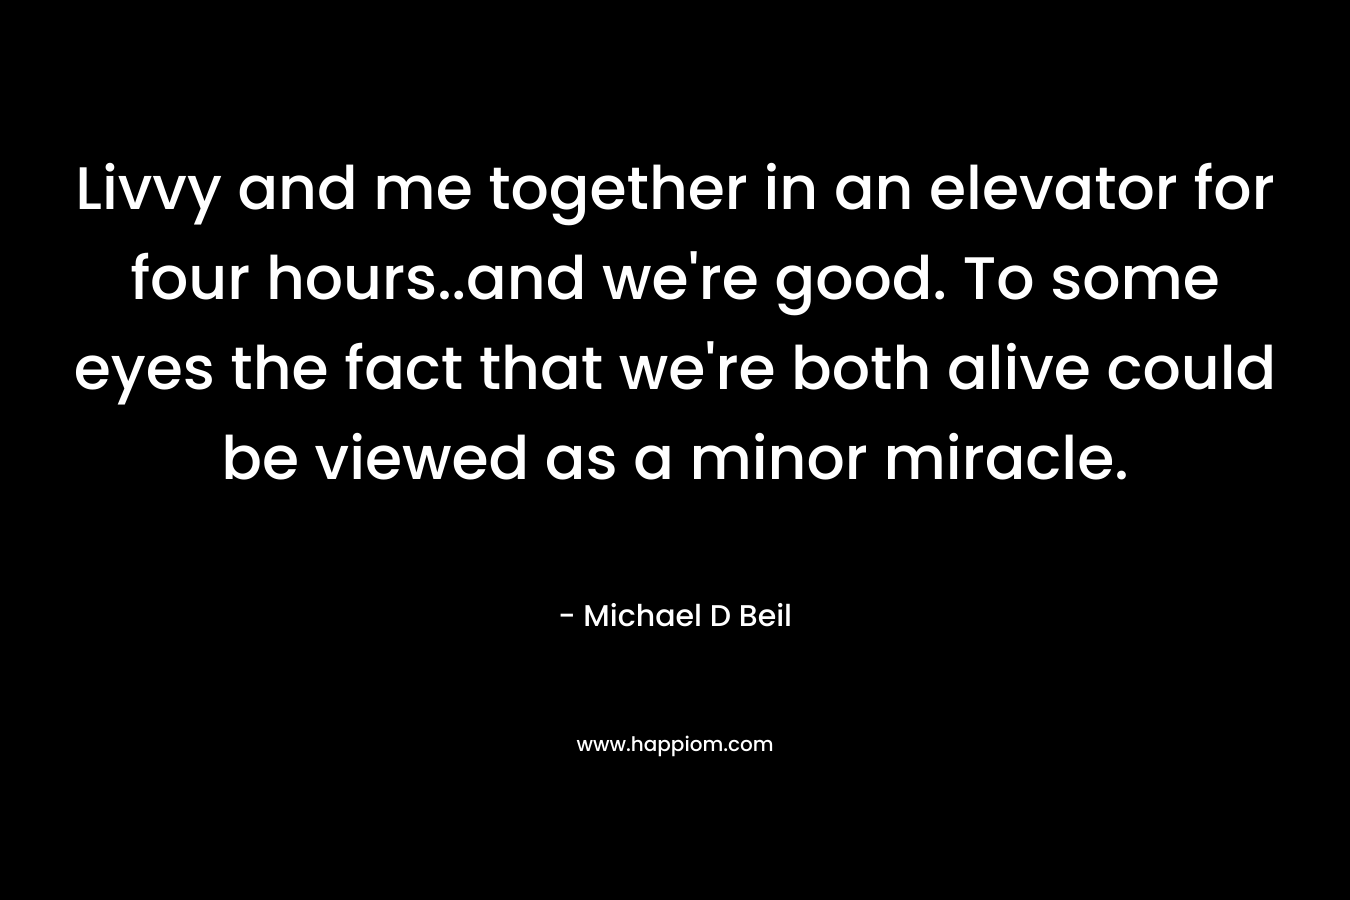 Livvy and me together in an elevator for four hours..and we’re good. To some eyes the fact that we’re both alive could be viewed as a minor miracle. – Michael D Beil